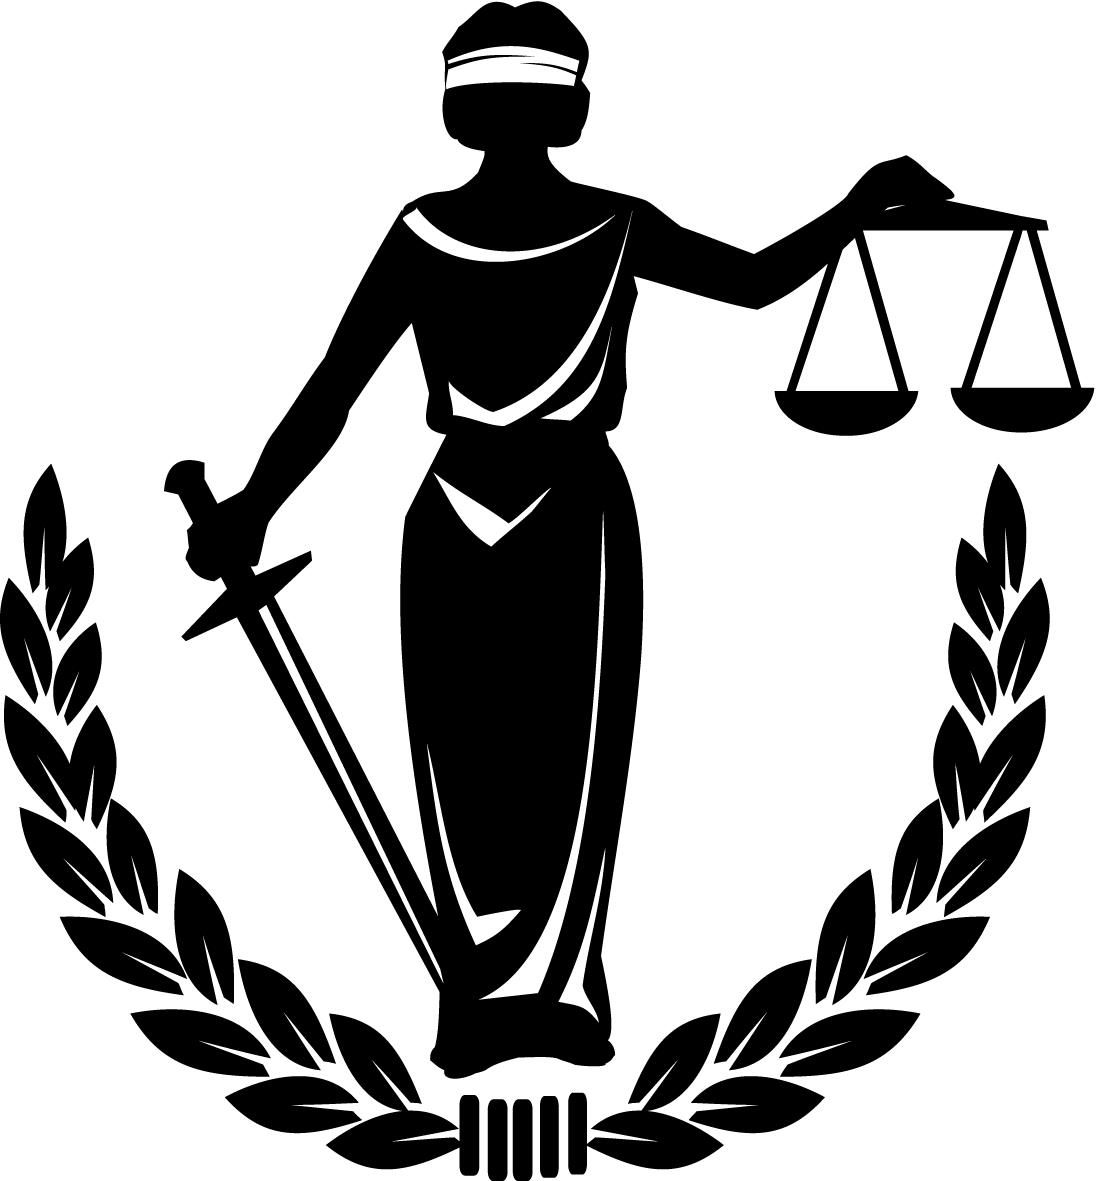 Images Of Justice Scales   Clipart Best